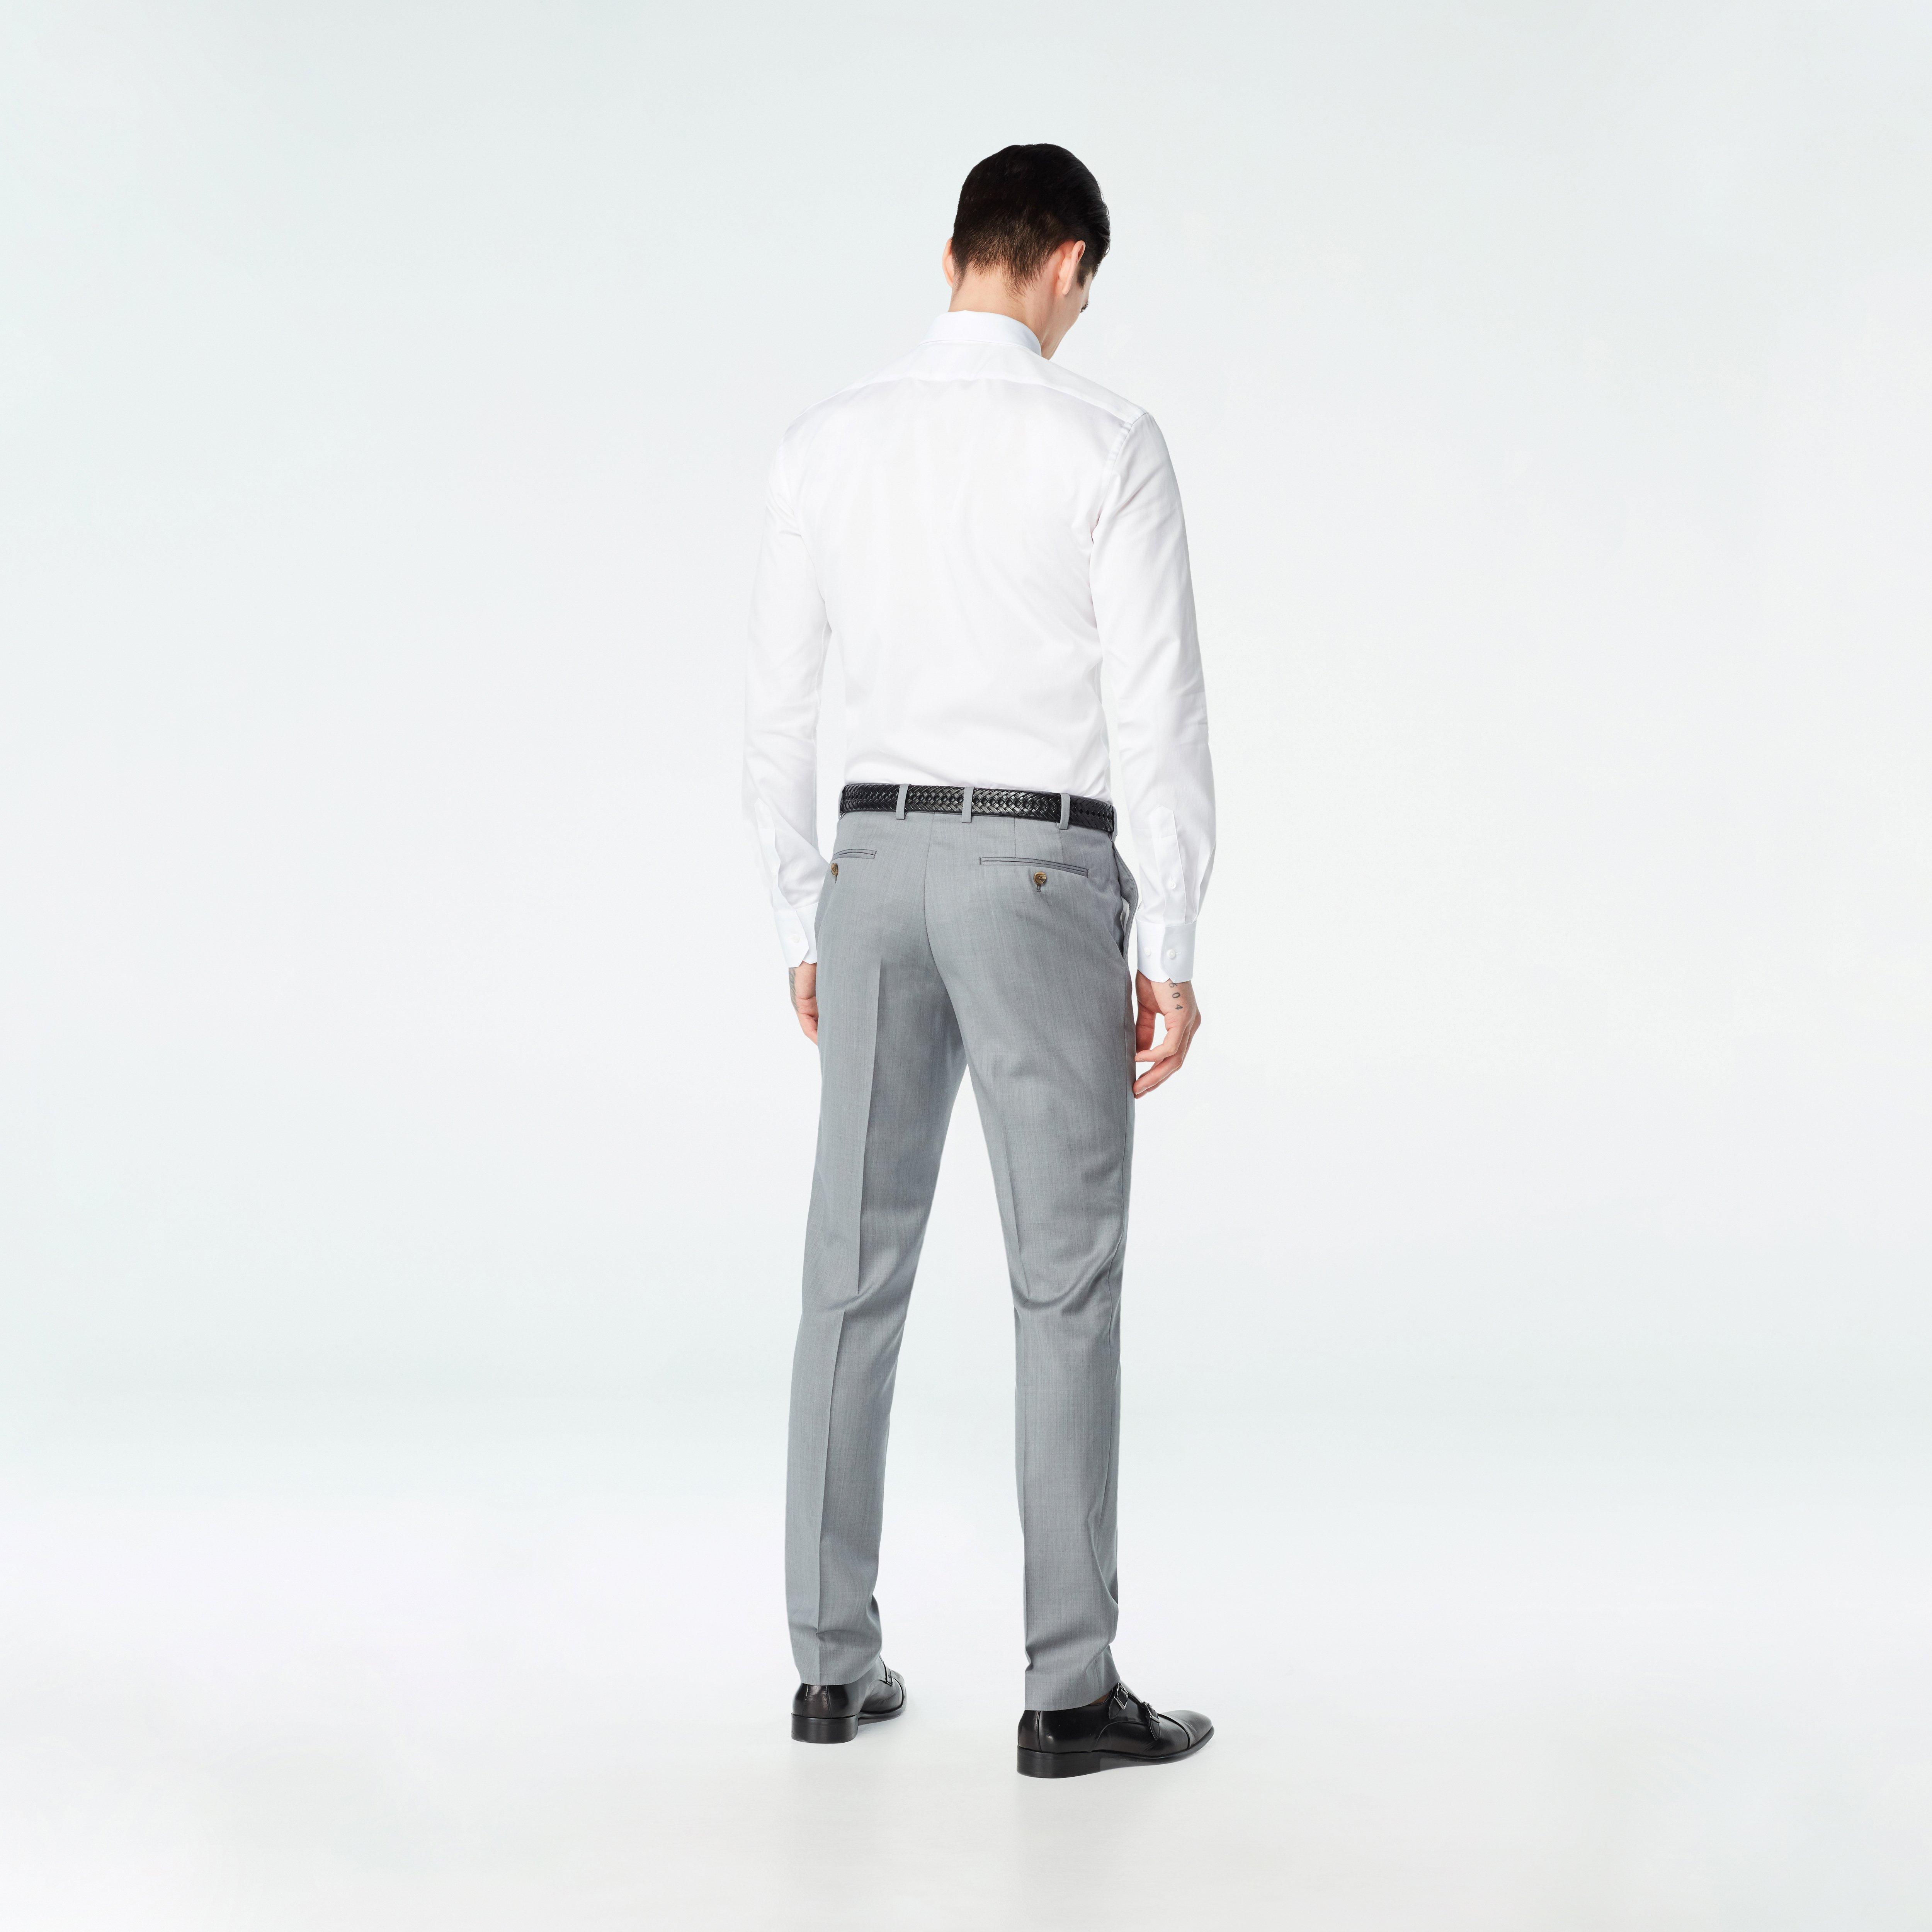 Custom Suits Made For You - Hemsworth Light Gray Suit | INDOCHINO